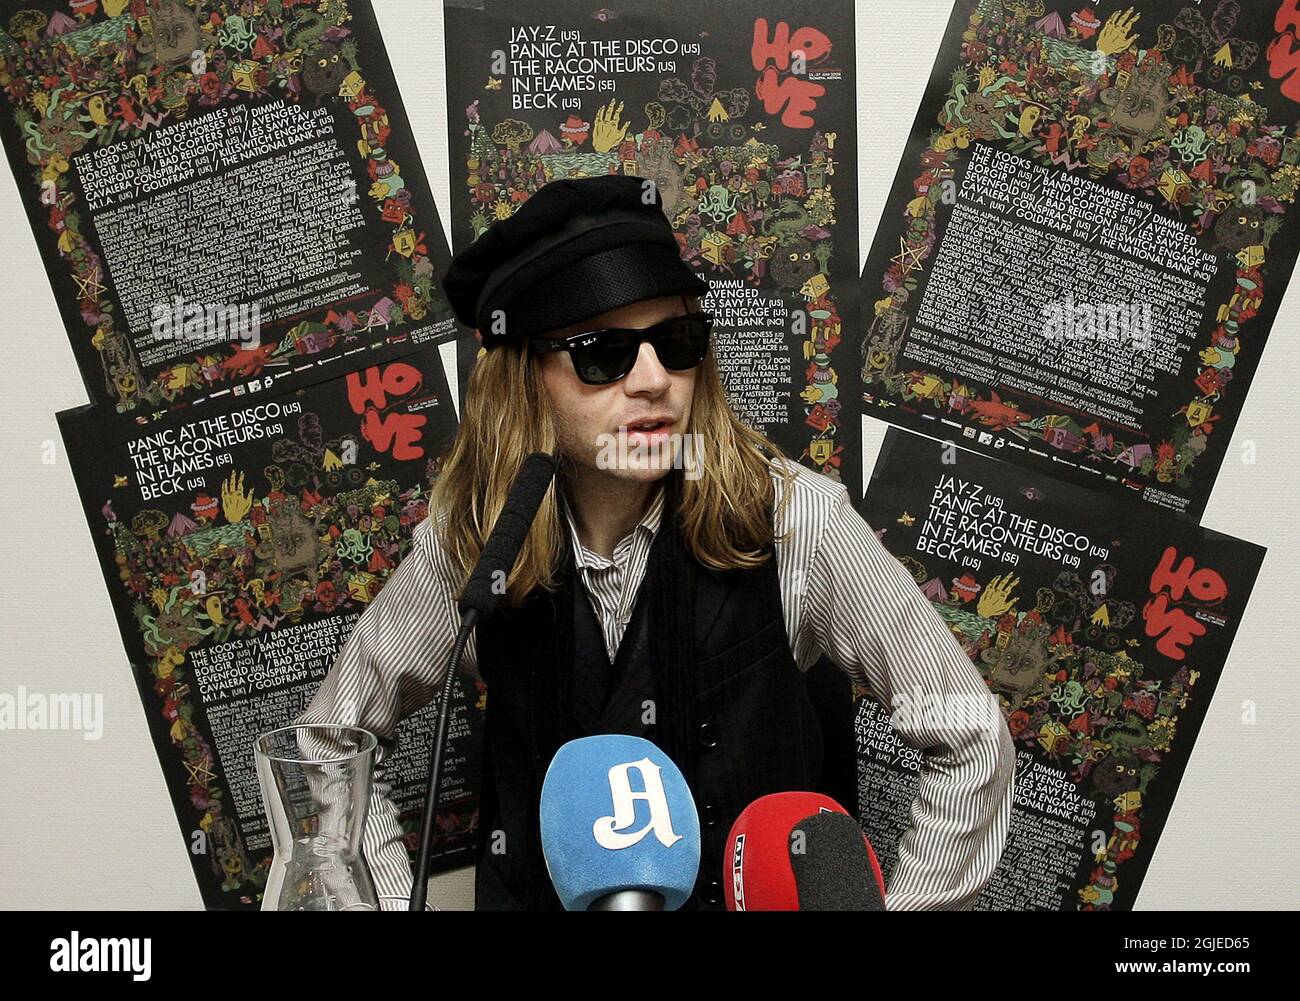 The artist Beck at a press conference Wednesday prior to playing at Hovefestivalen in Norway. Stock Photo